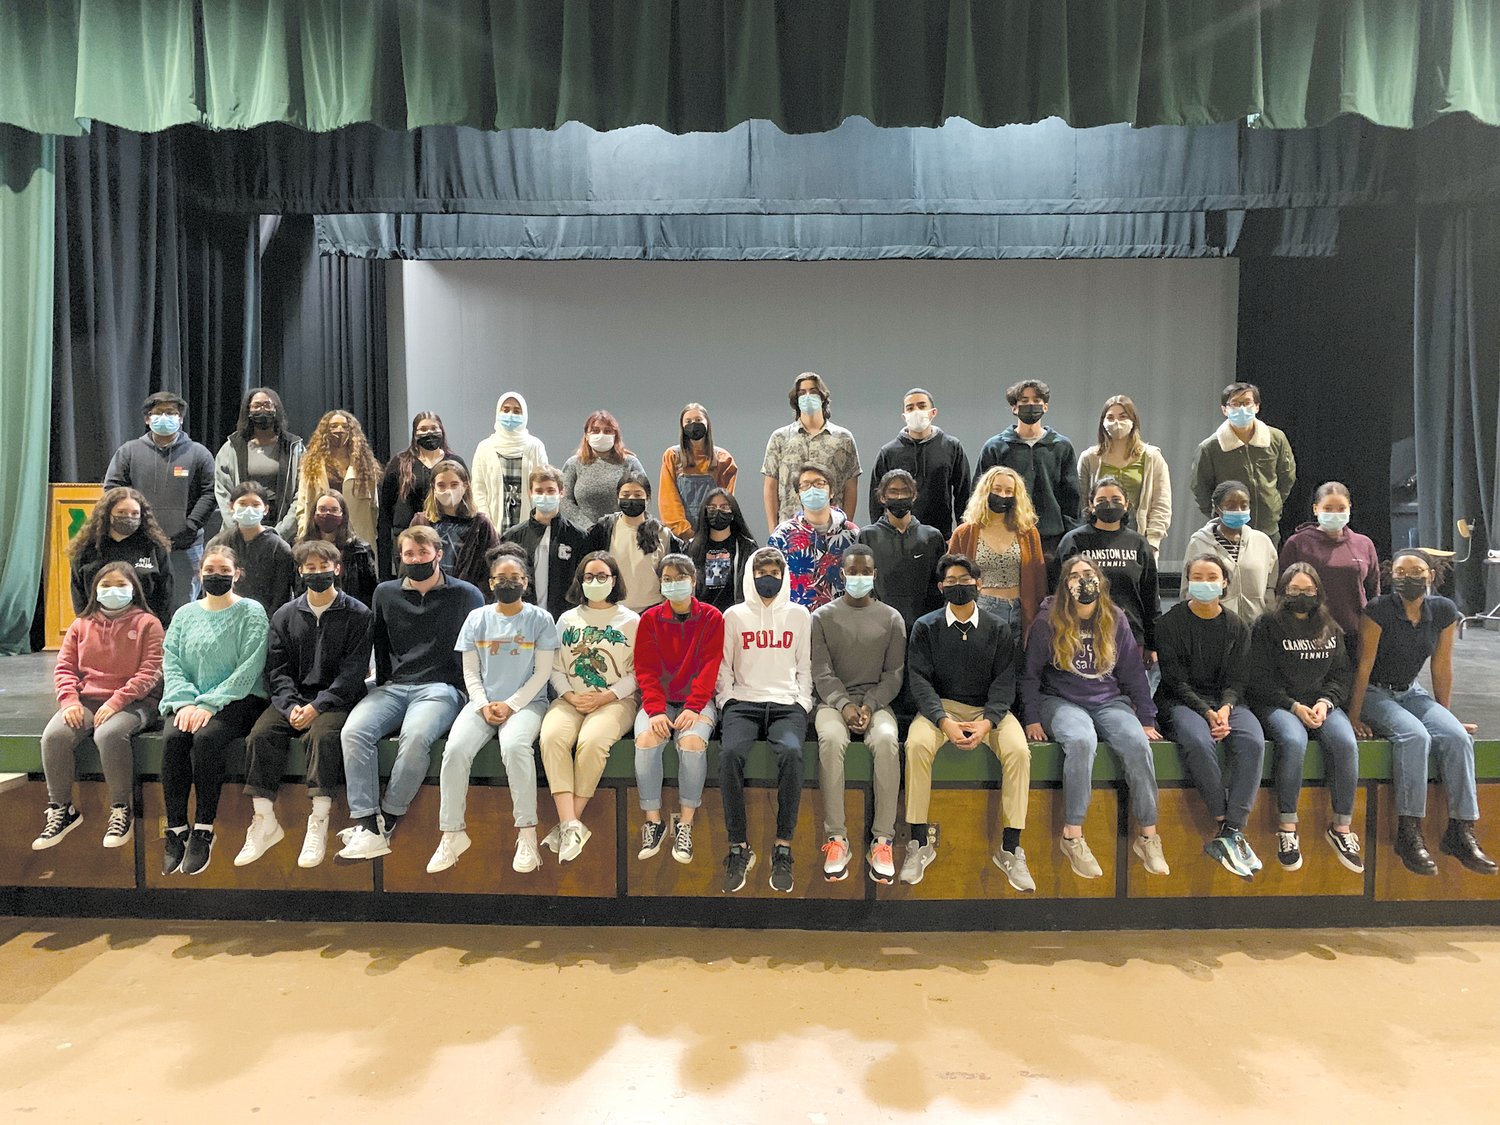 HELPING YOUNG READERS: Cranston High School East’s National Honor Society students completed a group project
where they recorded themselves reading children’s books aloud as part of their requirement to be in the honor society.